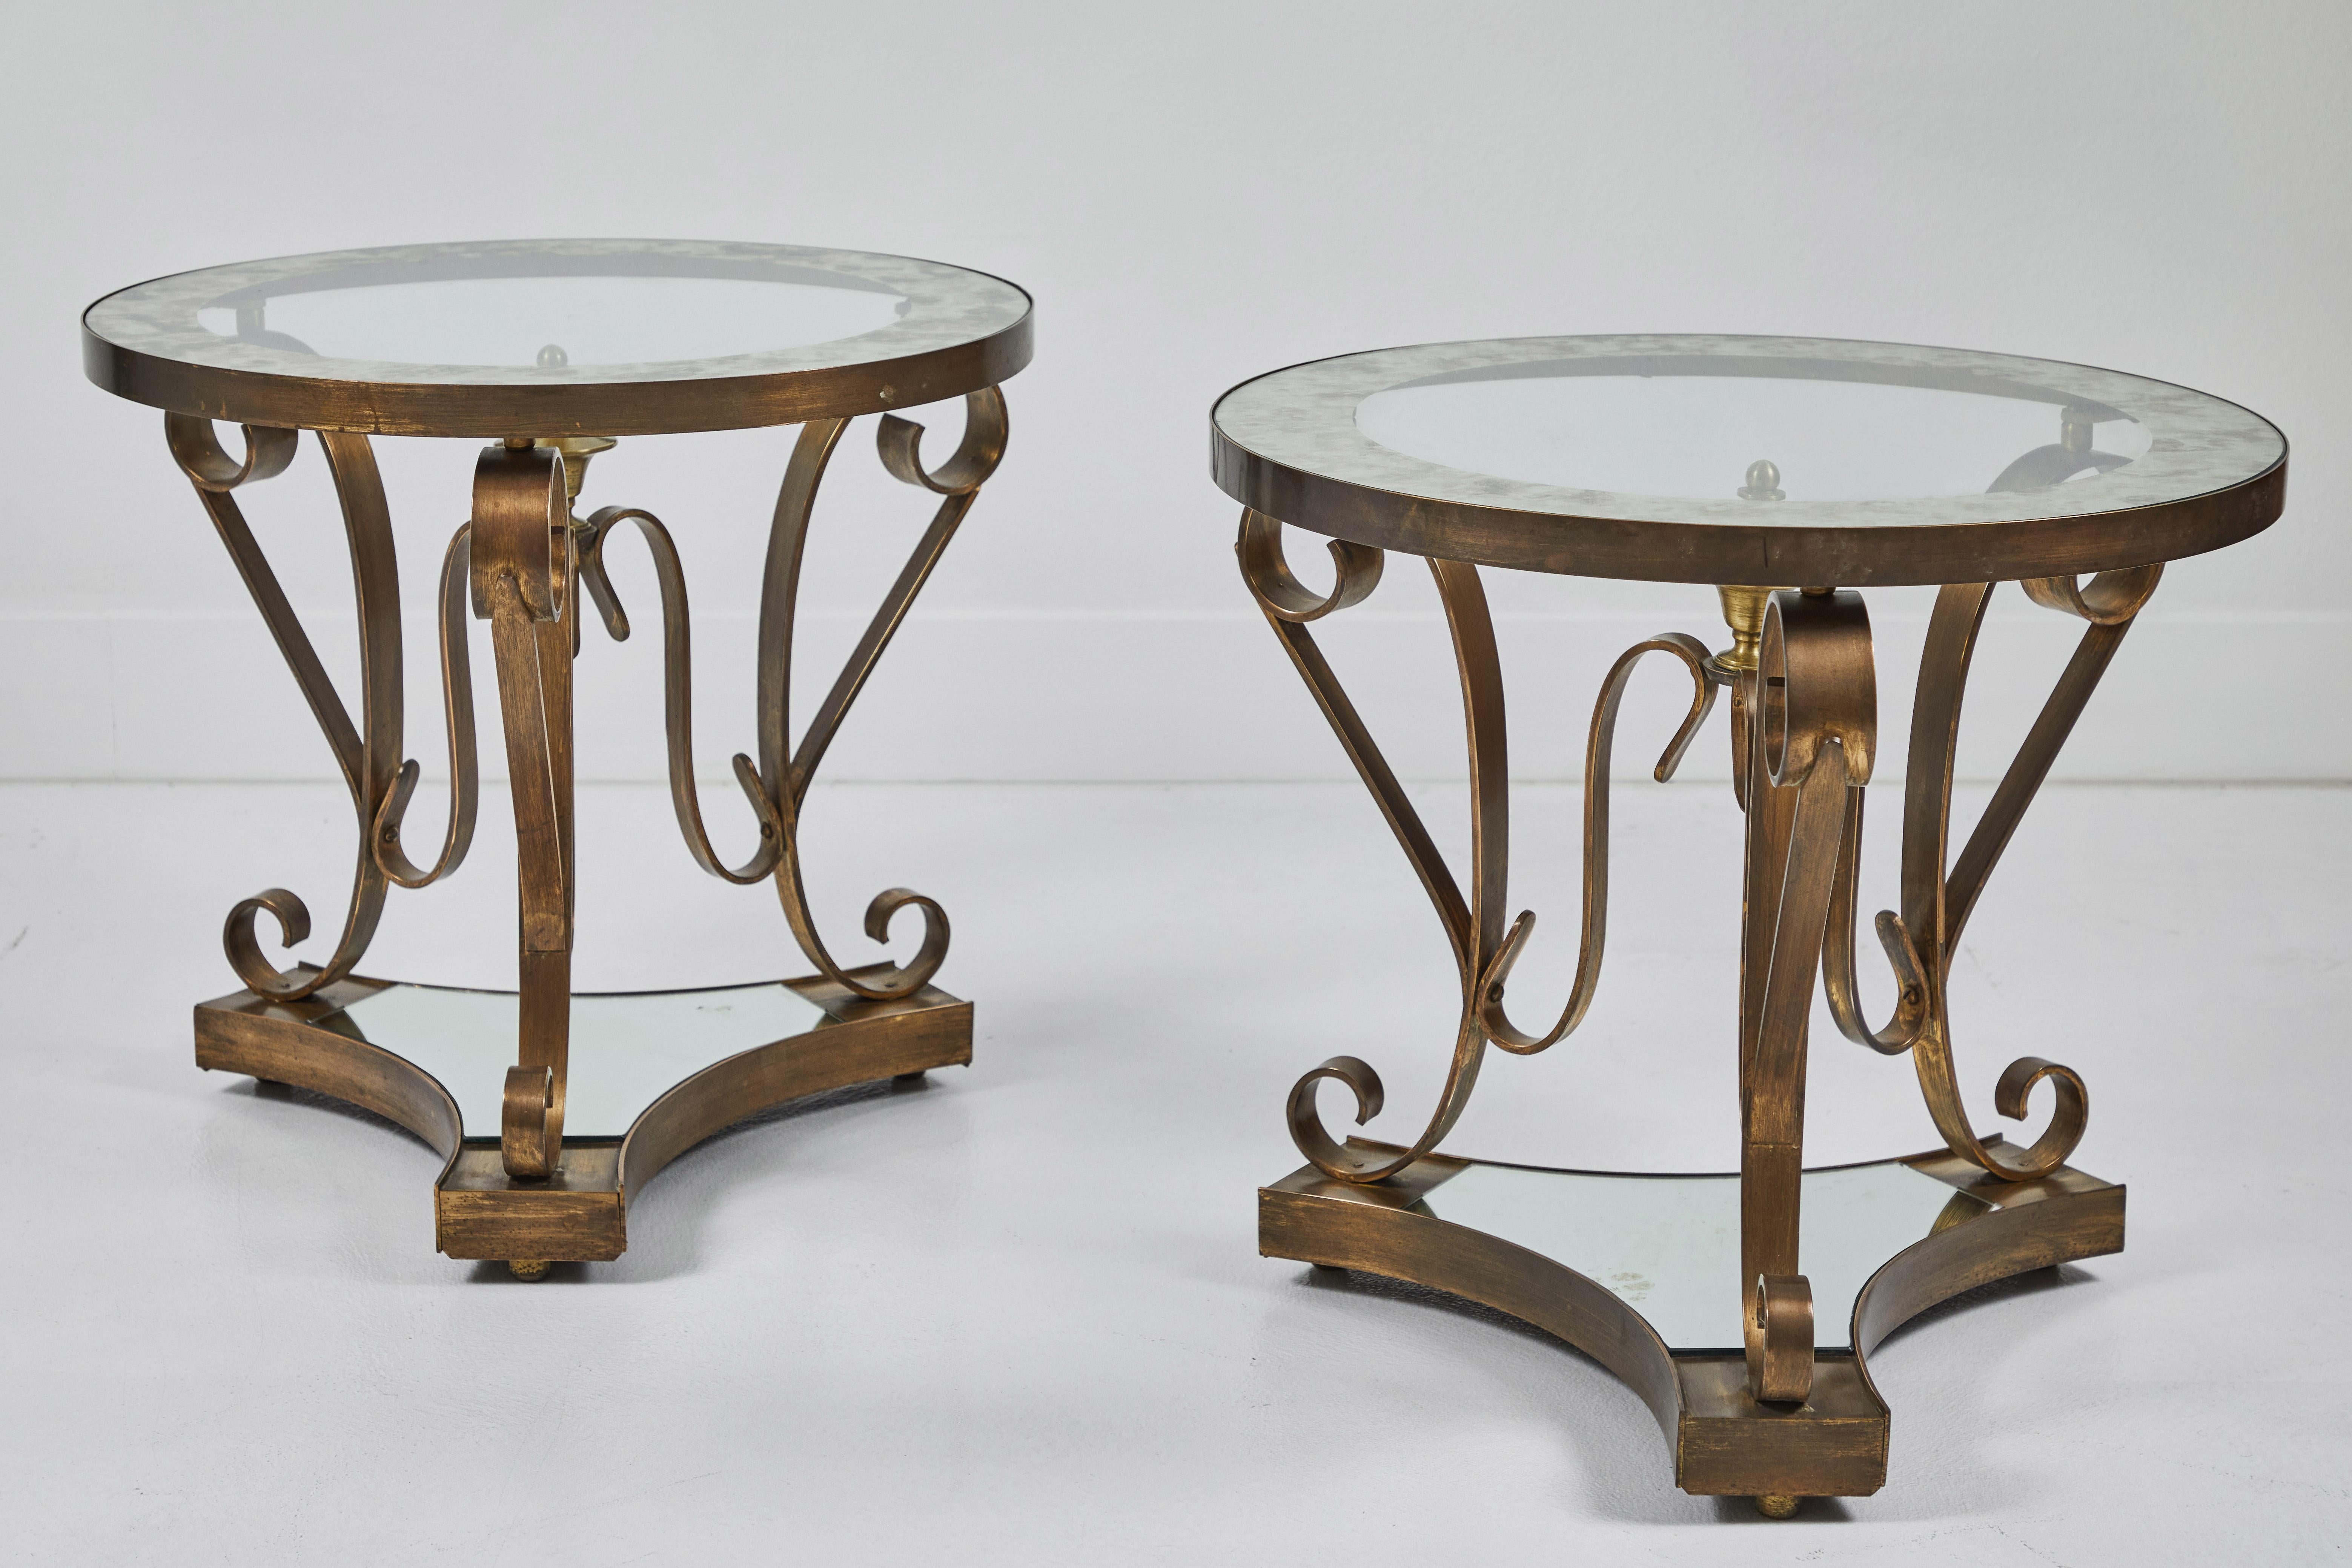 2 patinated brass and mirrored side tables by Arturo Pani (1915-1981), utilizing contrasting mediums of brass for the base, clear glass and eglimose for the top and mirror on the lower tier. These sculptural tables exemplify the Mexico City Modern